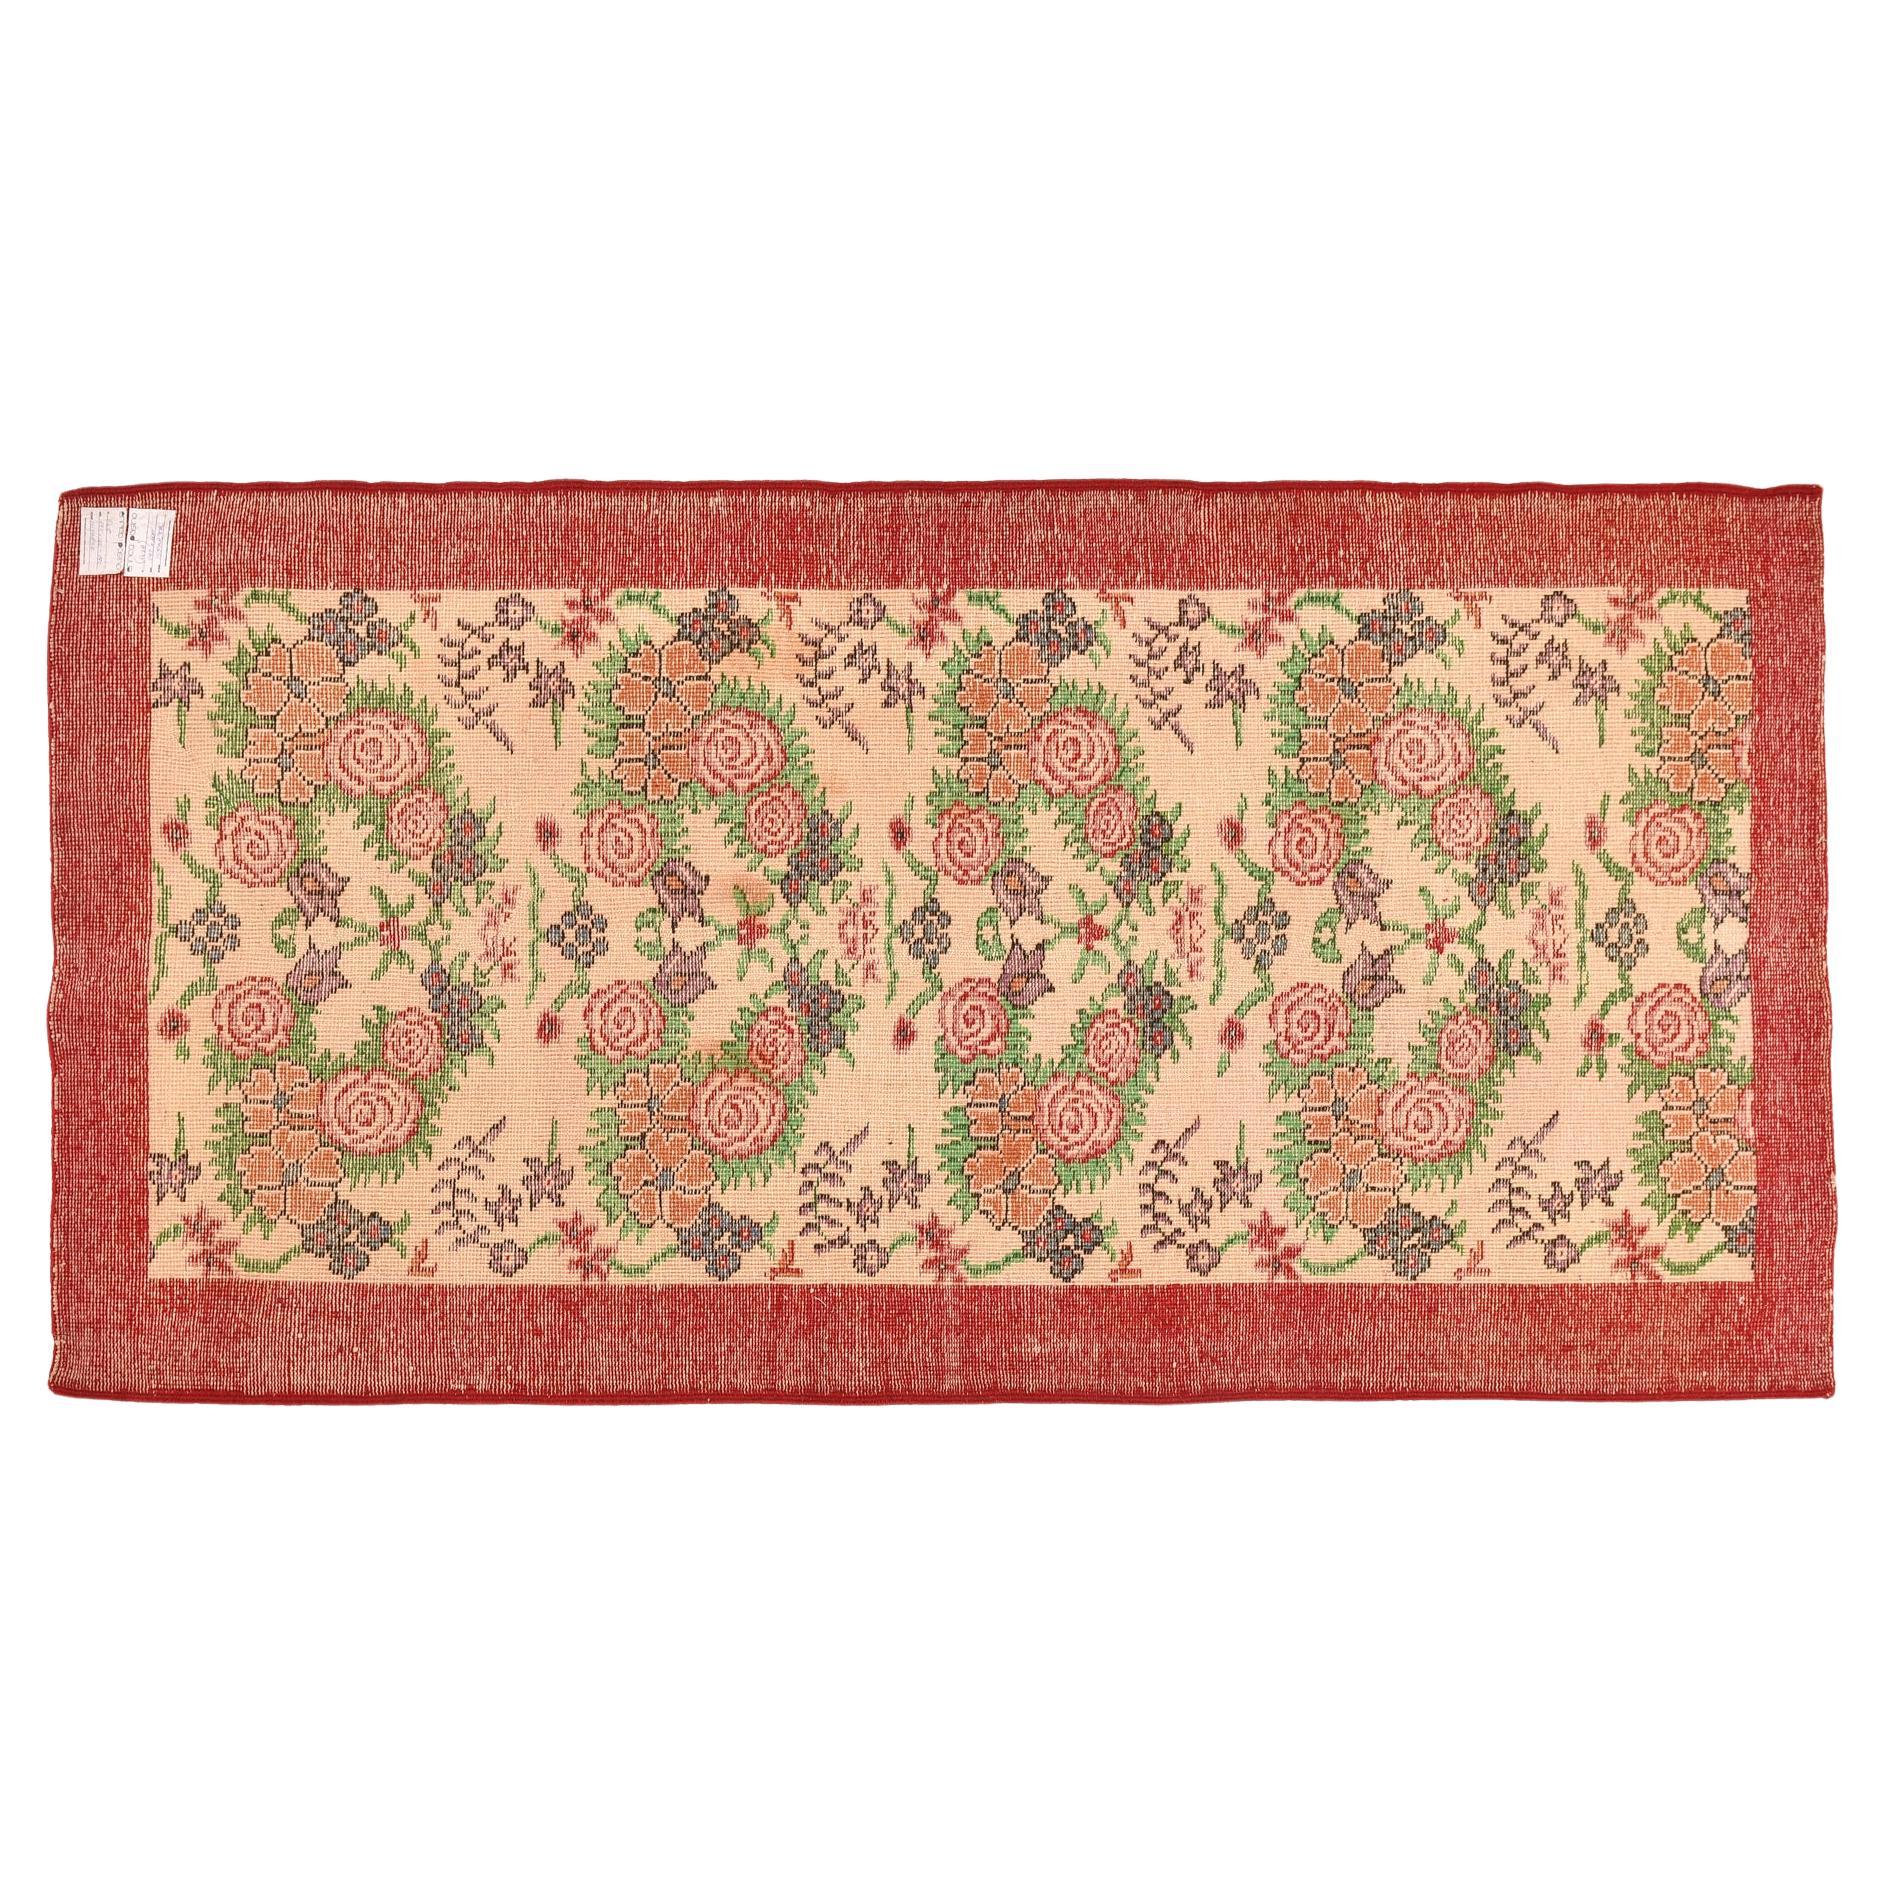 Other Isparta Carpet with Bunches of Flowers For Sale